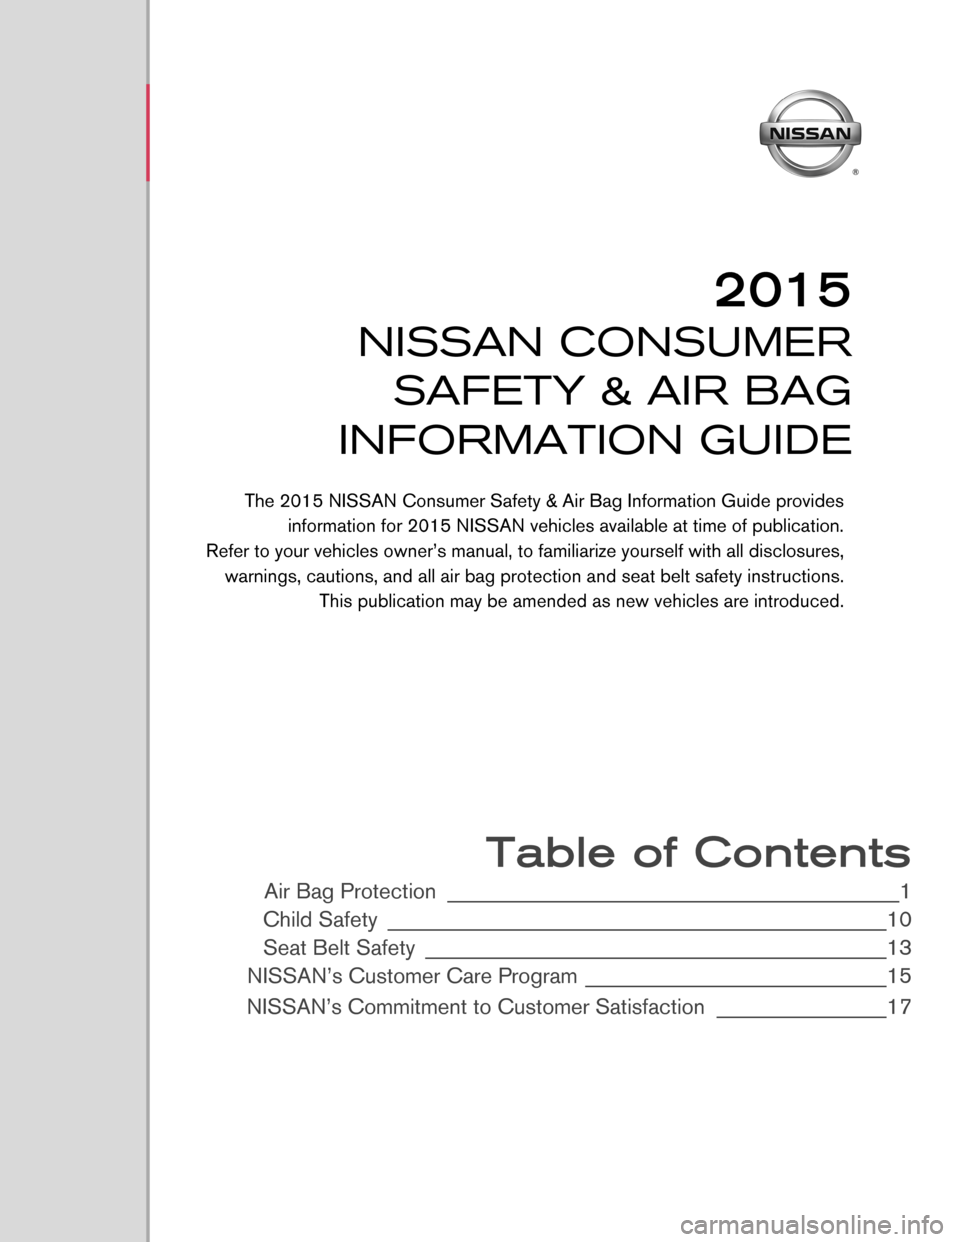 NISSAN ROGUE SELECT 2015 2.G Consumer Safety Air Bag Information Guide  
 
 
 
 
 
 
 
 
 
 
 
 
 
 
 
 
 
 
 
 
 
 
 Table of Contents 
Air Bag Protection __________________\d__________________\d____________1 
Child \fafety _________________________\d__________________\